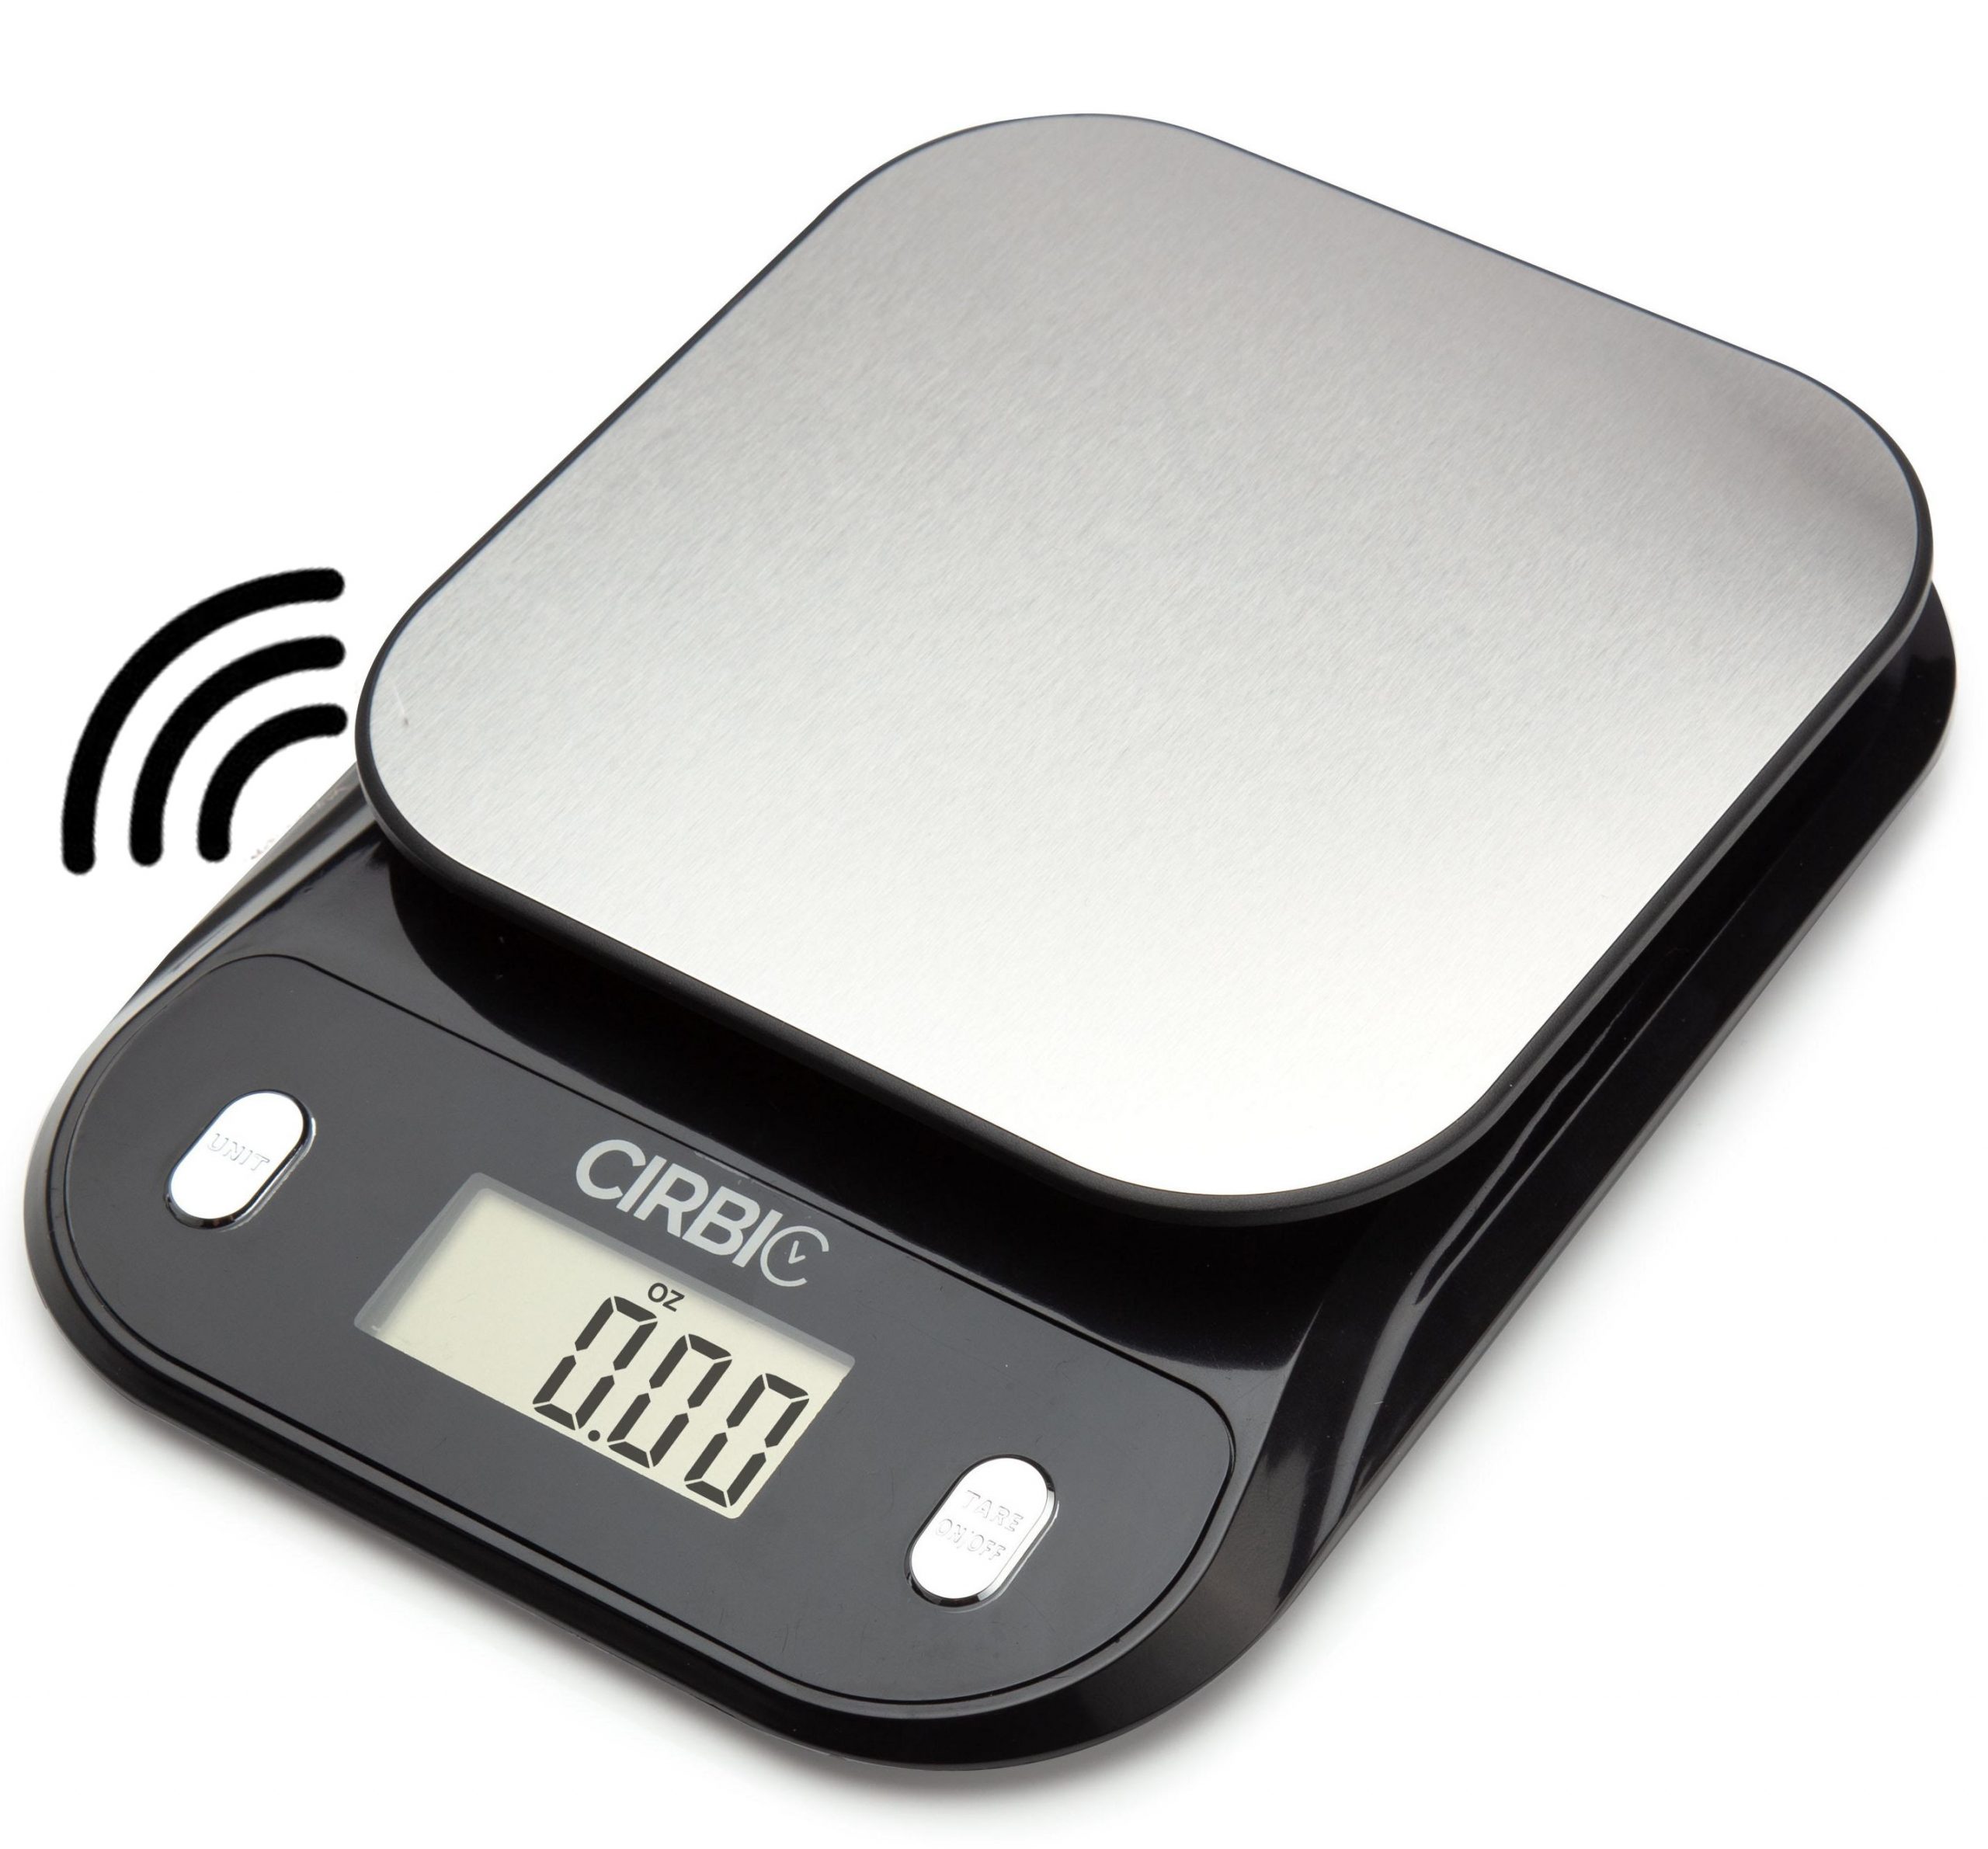 Talking Kitchen Scales – Big Numbers with Clear Loud Voice North American Accent